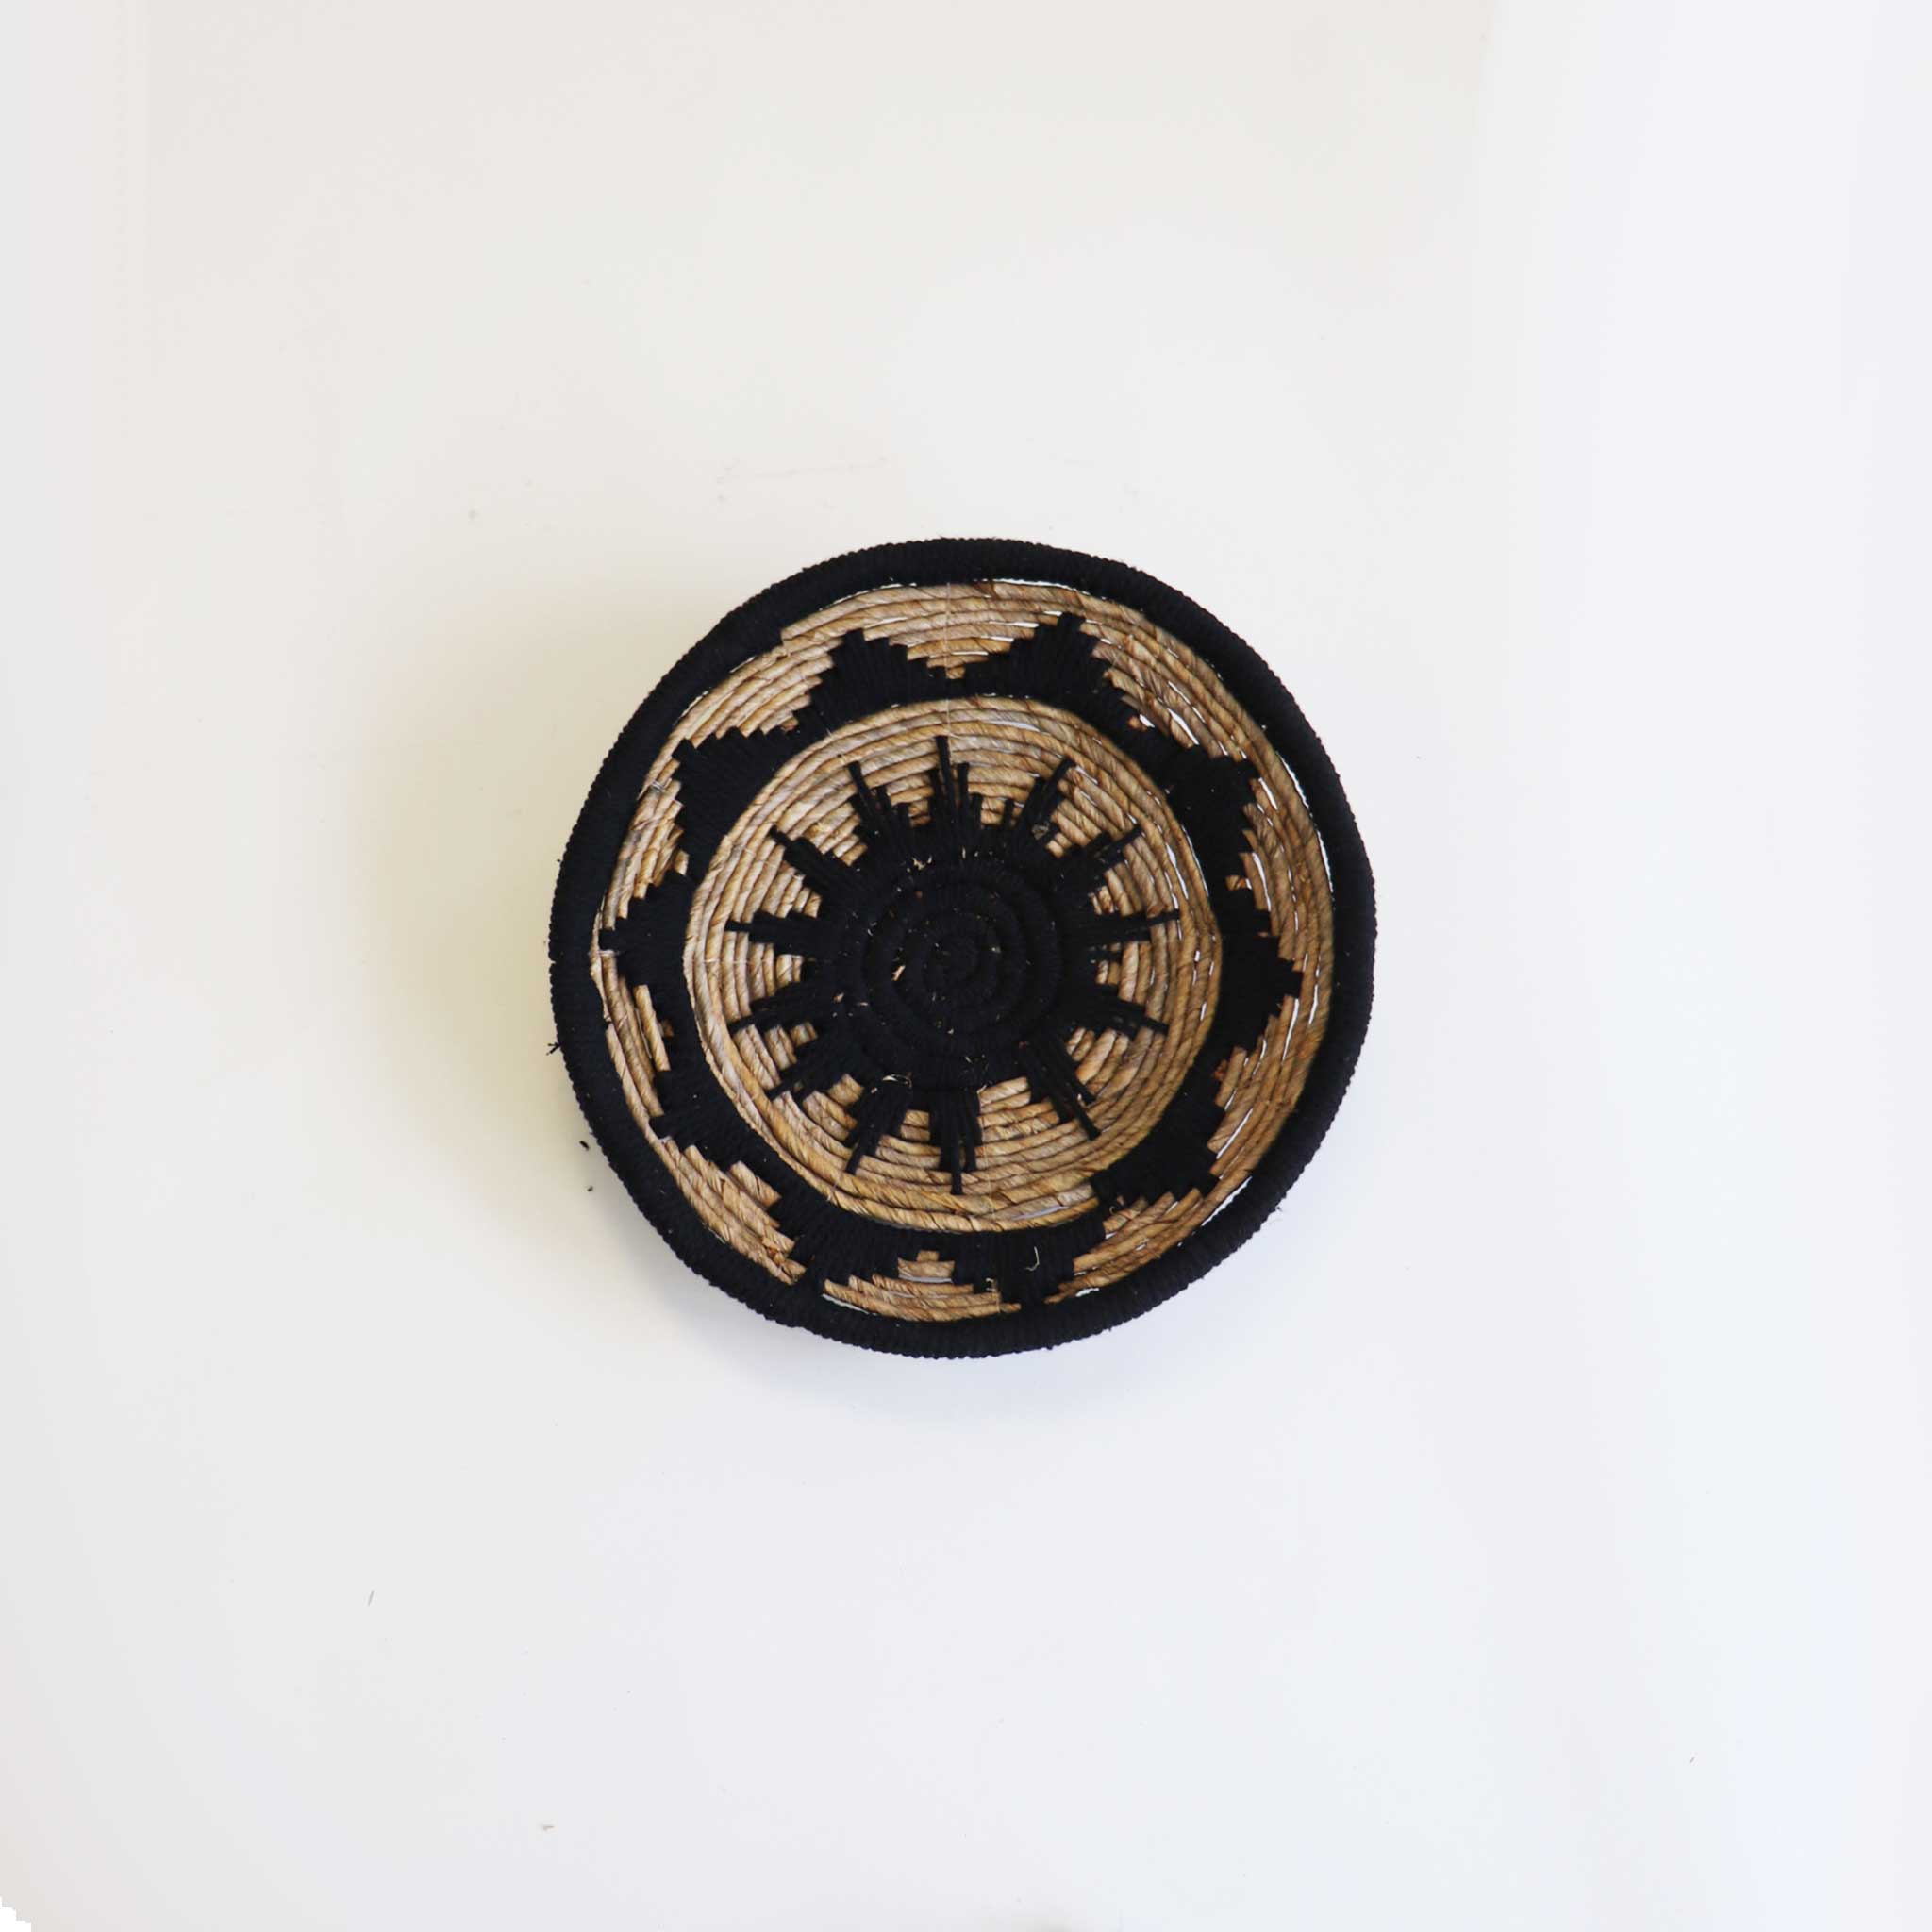 Decorative Black & Natural Rope Woven Wall Art/Plate